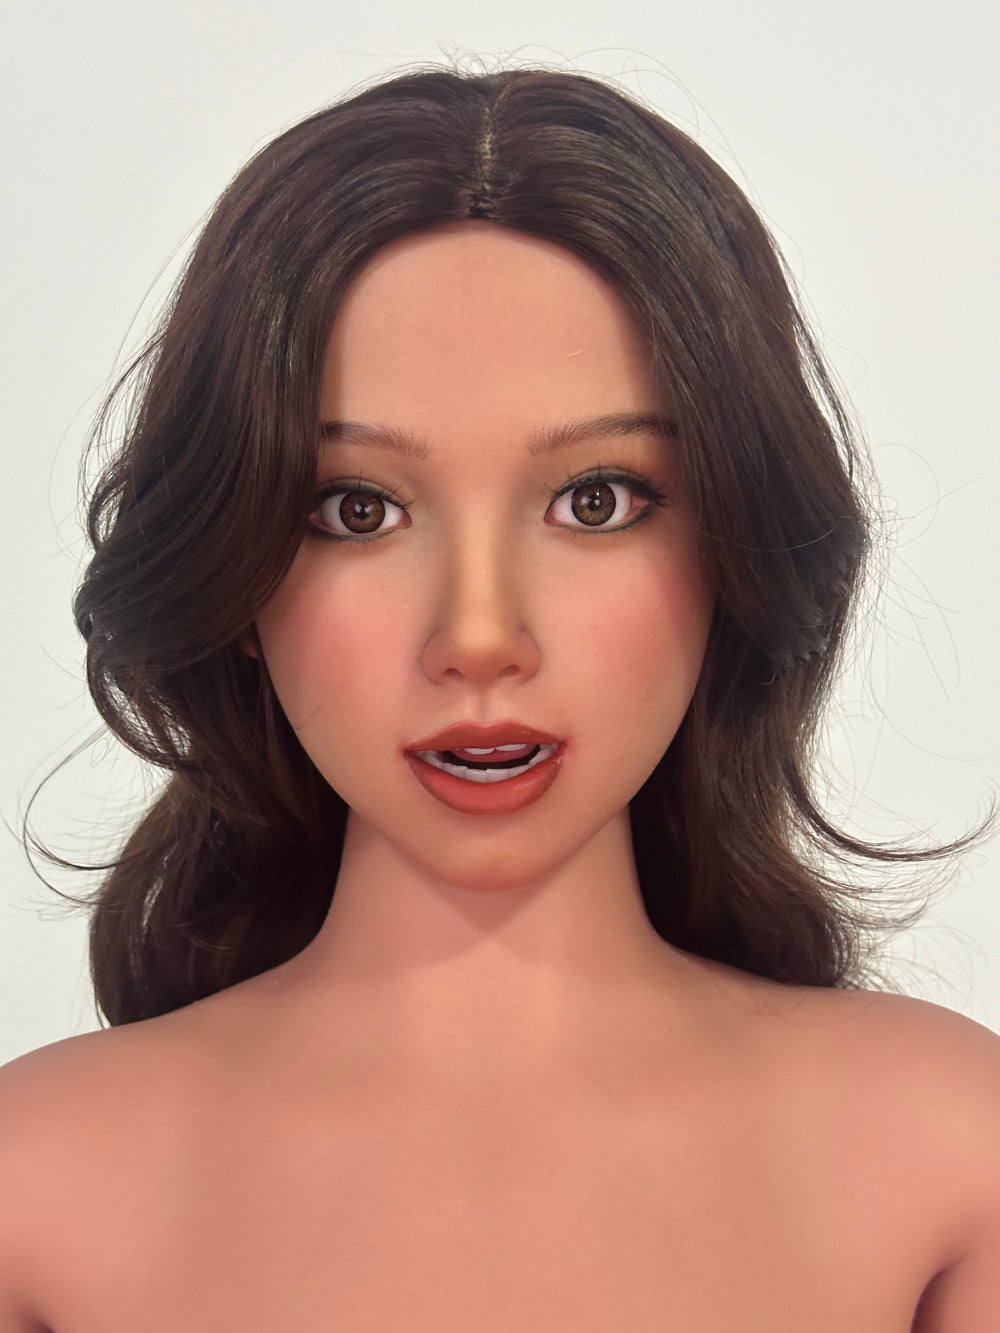 Zelex Doll SLE Series 165 cm D Silicone - ZXE209-2 Movable Jaw